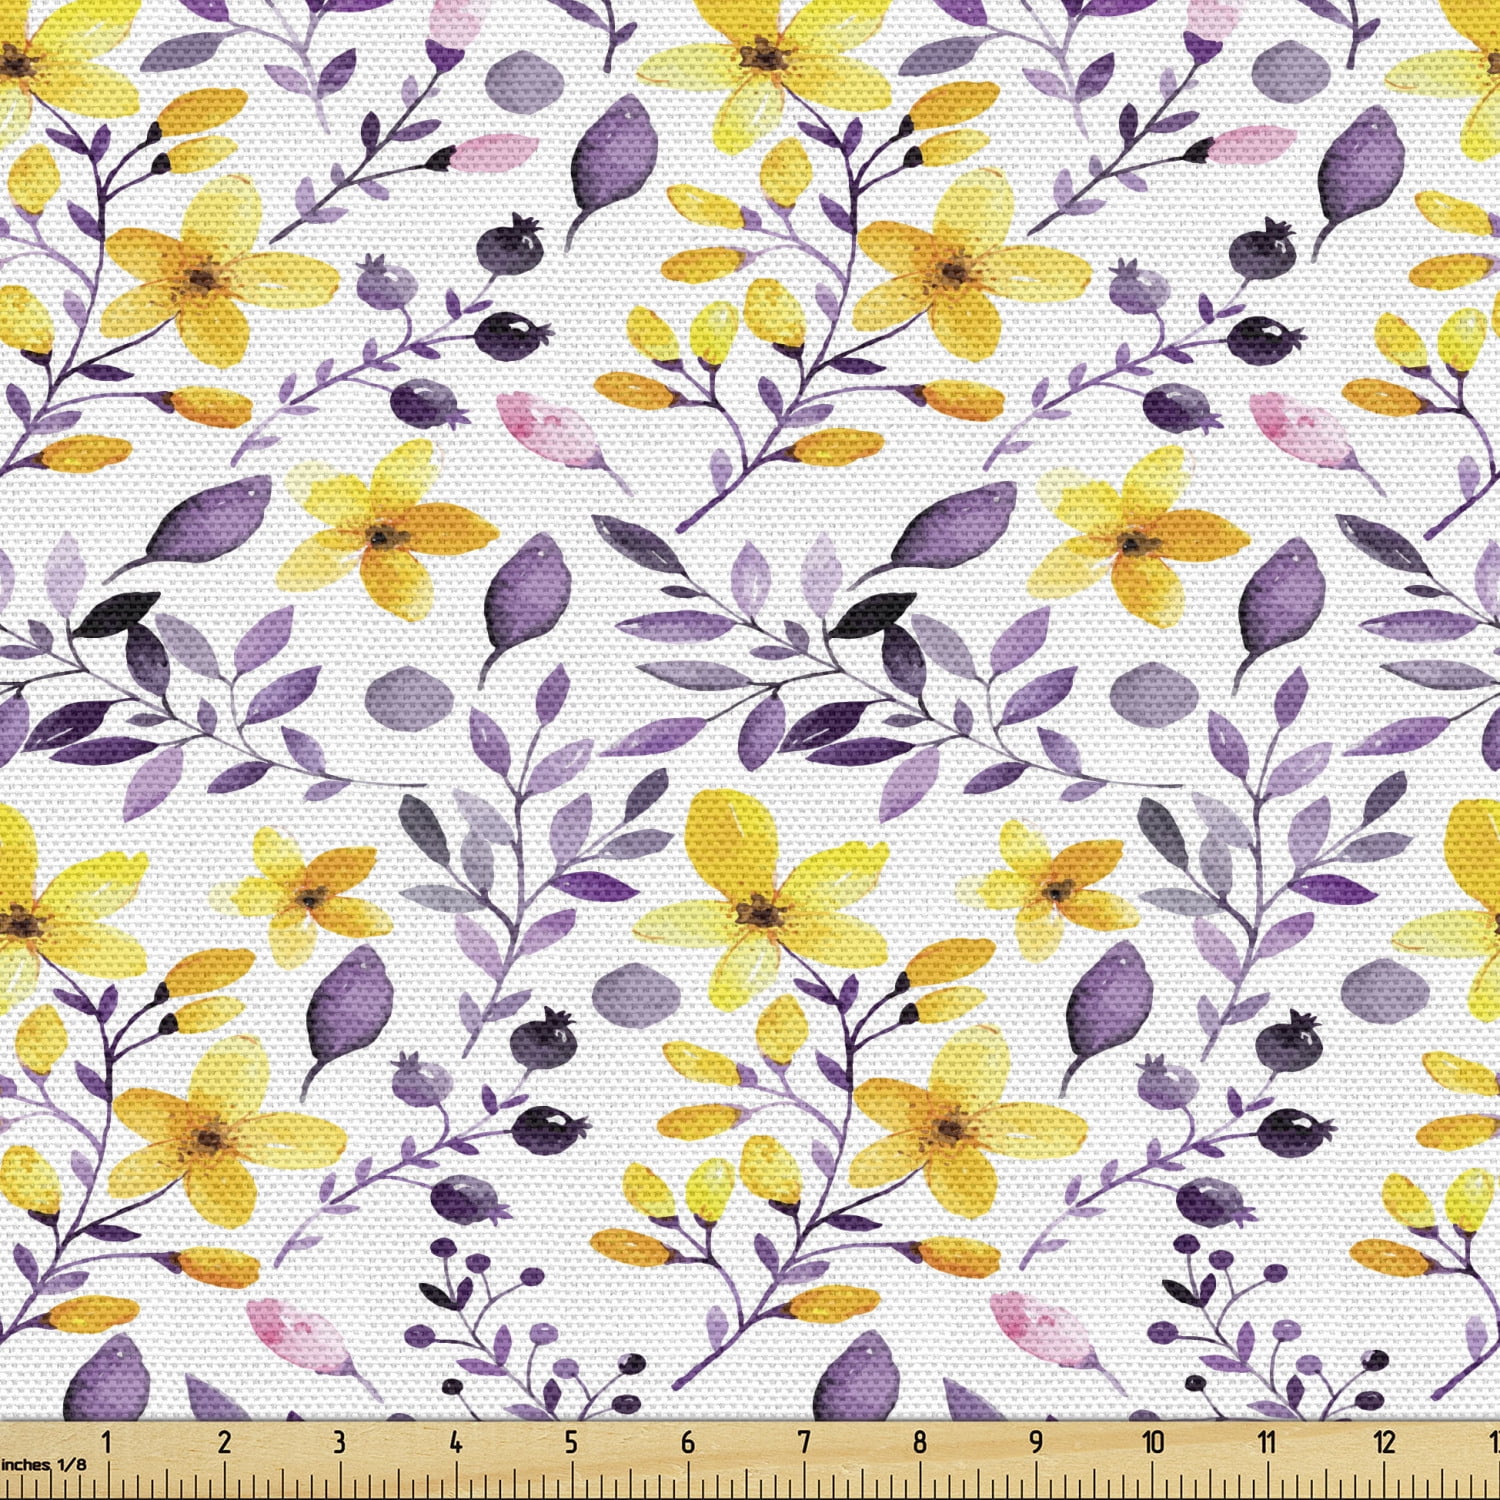 Soft Floral in Sage / Yellow / Lavender / Cream | Home Decor / Drapery  Fabric | 100% Cotton | 54 Wide | By the Yard